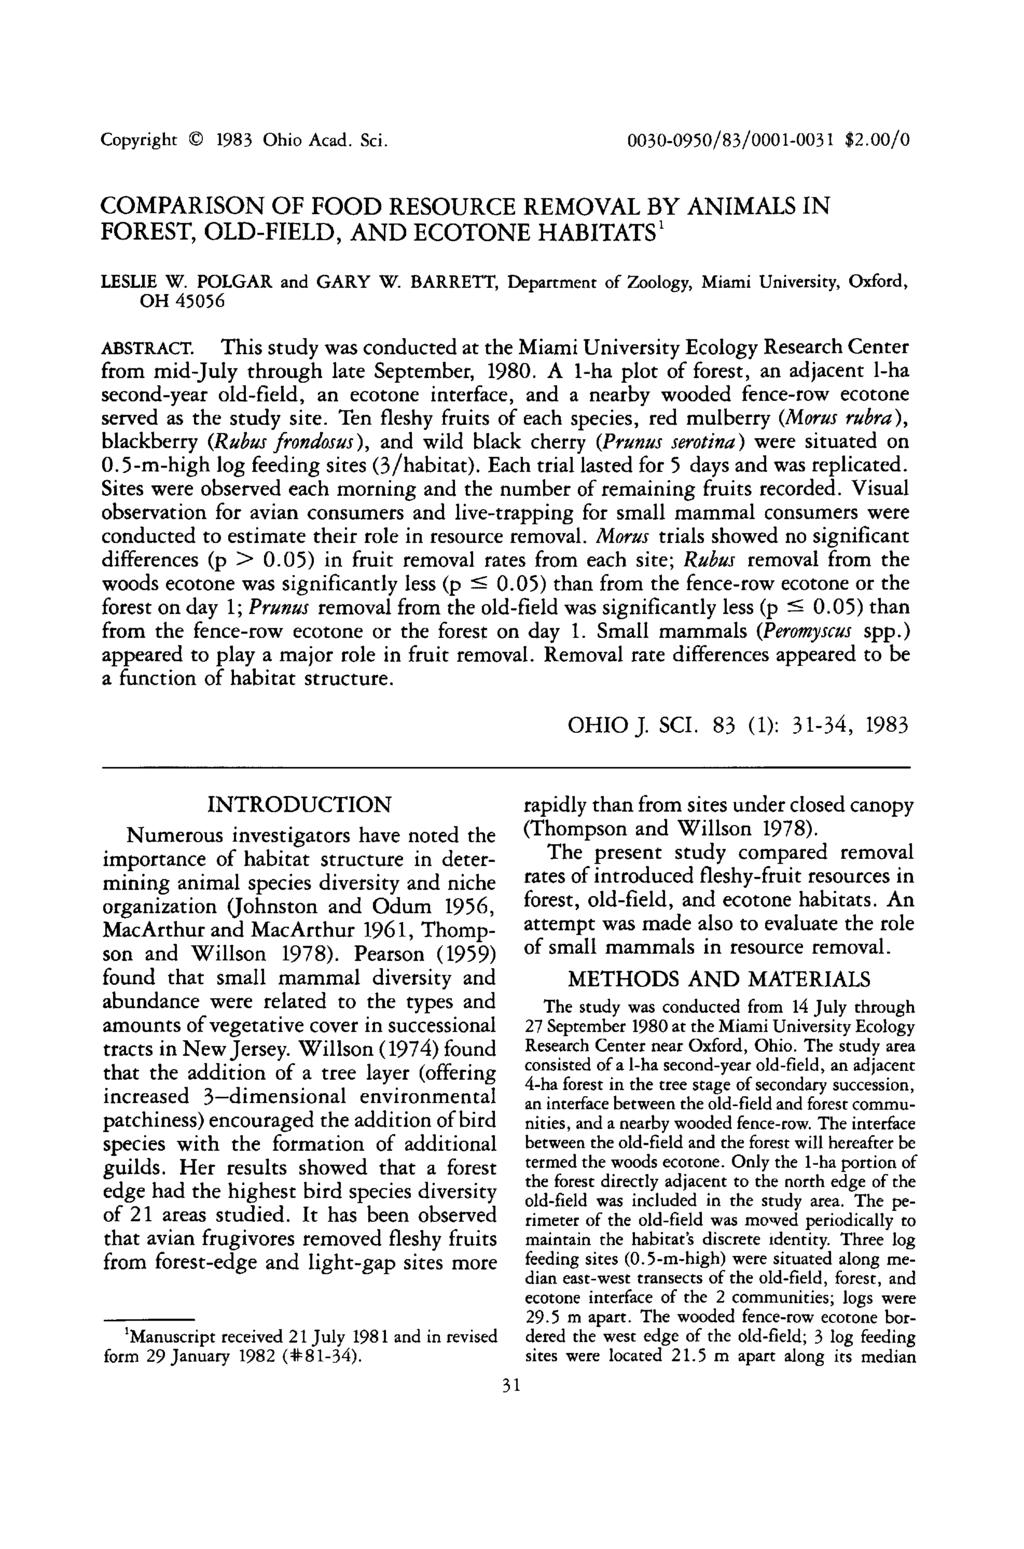 Copyright 1983 Ohio Acad. Sci. OO3O-O95O/83/OOO1-OO31 $2.00/0 COMPARISON OF FOOD RESOURCE REMOVAL BY ANIMALS IN FOREST, OLD-FIELD, AND ECOTONE HABITATS 1 LESLIE W. POLGAR and GARY W.